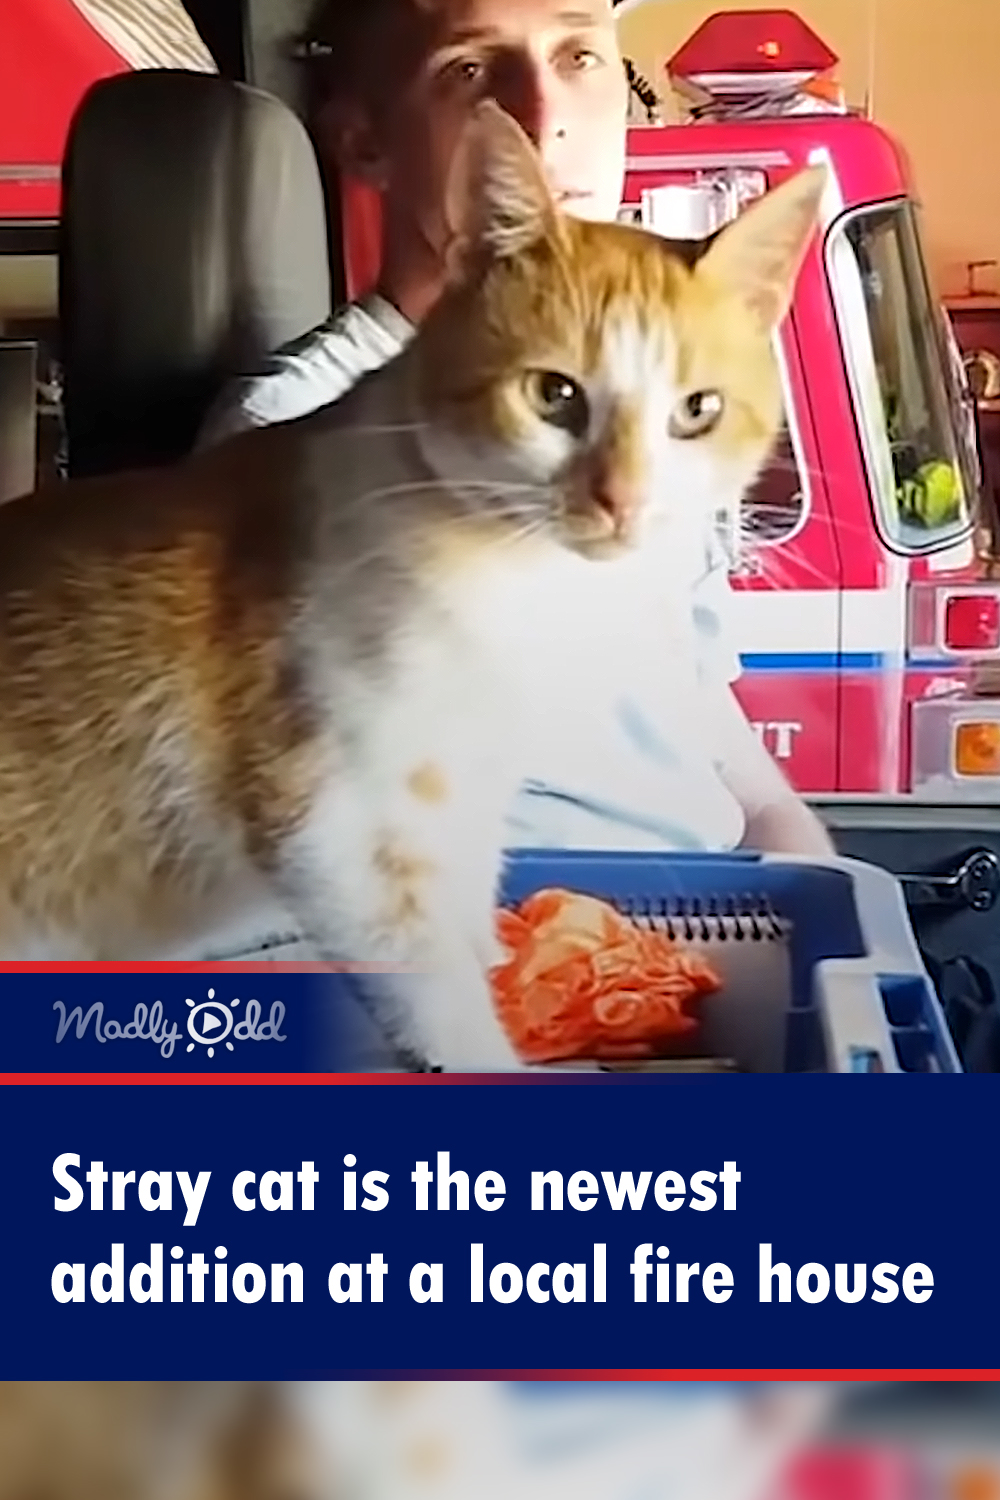 Stray cat is the newest addition at a local fire house